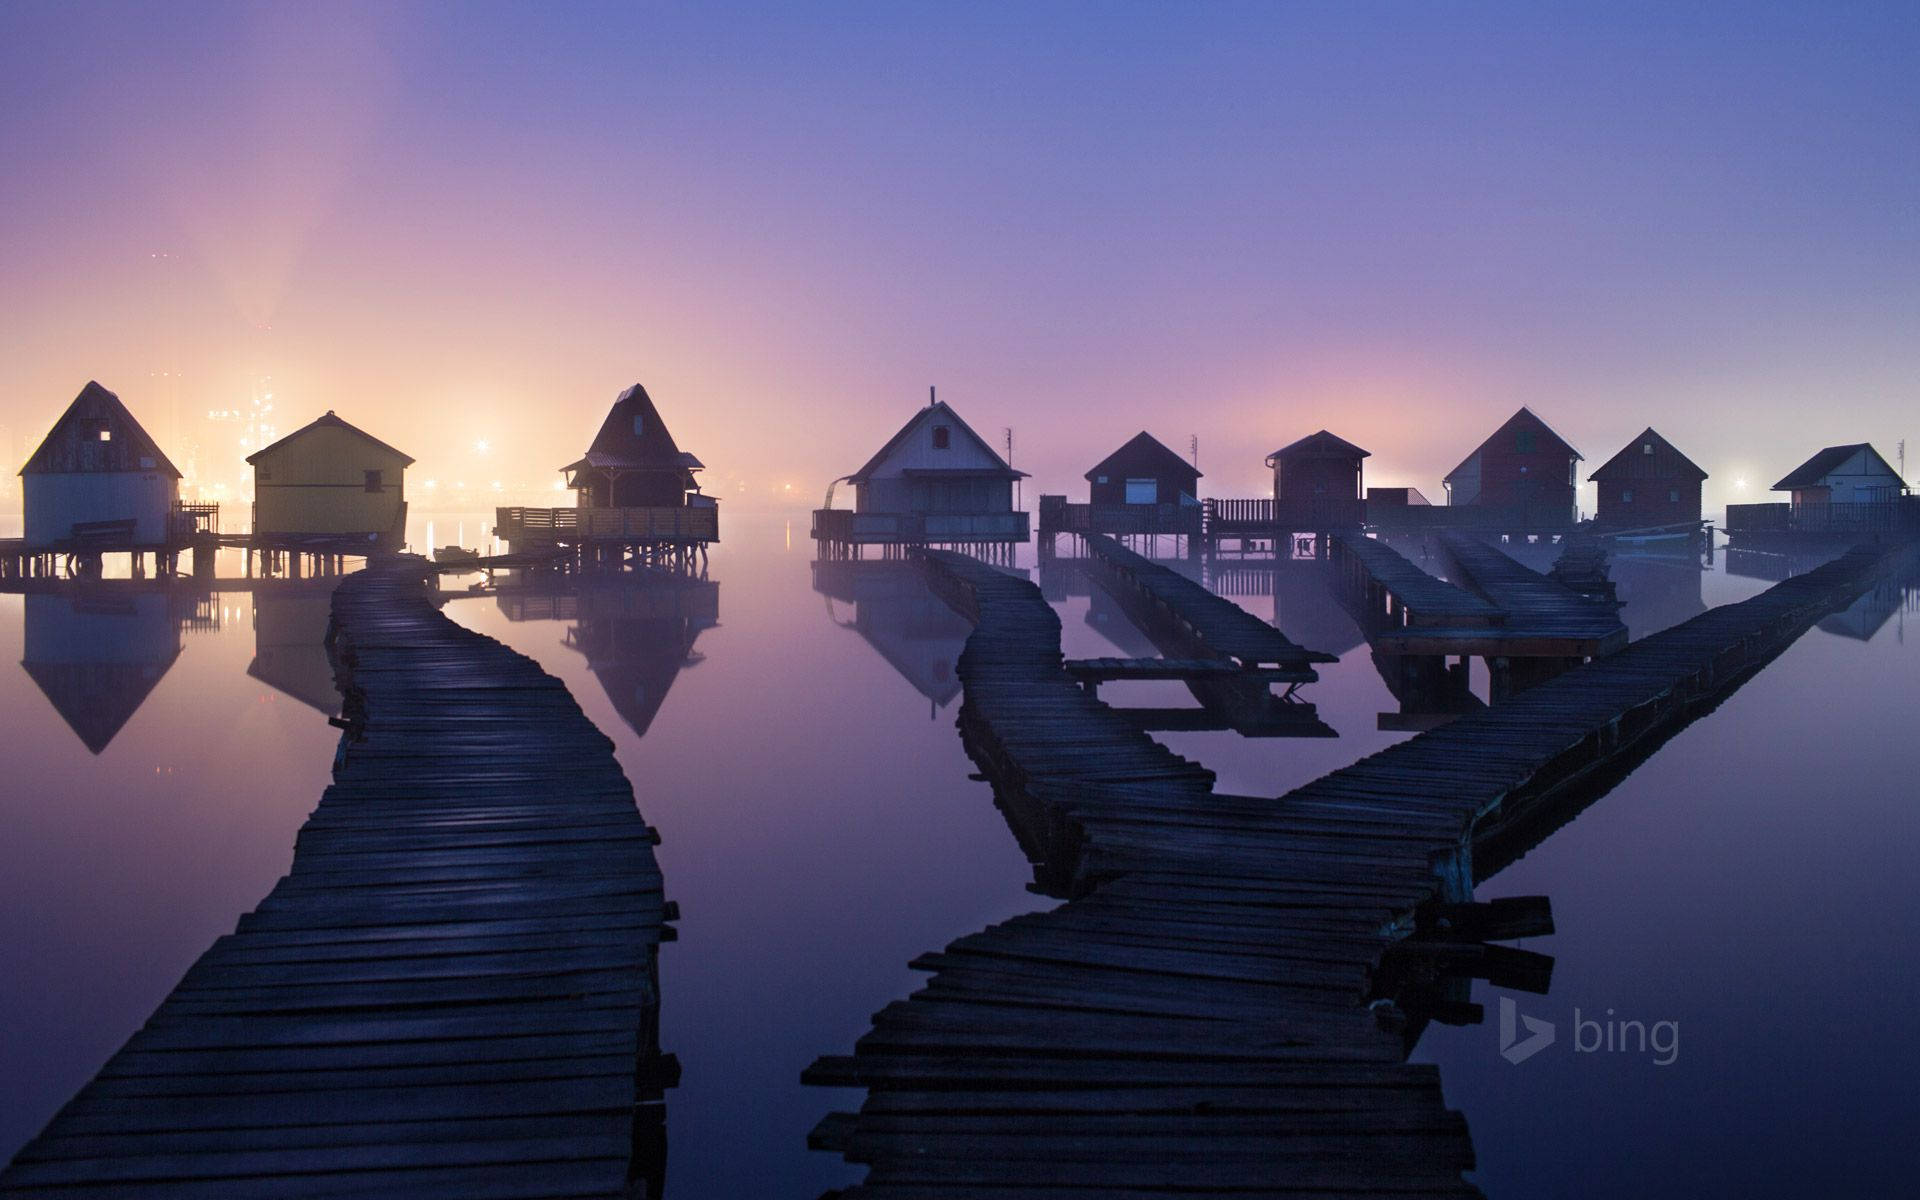 Take in the views and serenity of overwater bungalows in Tahiti Wallpaper